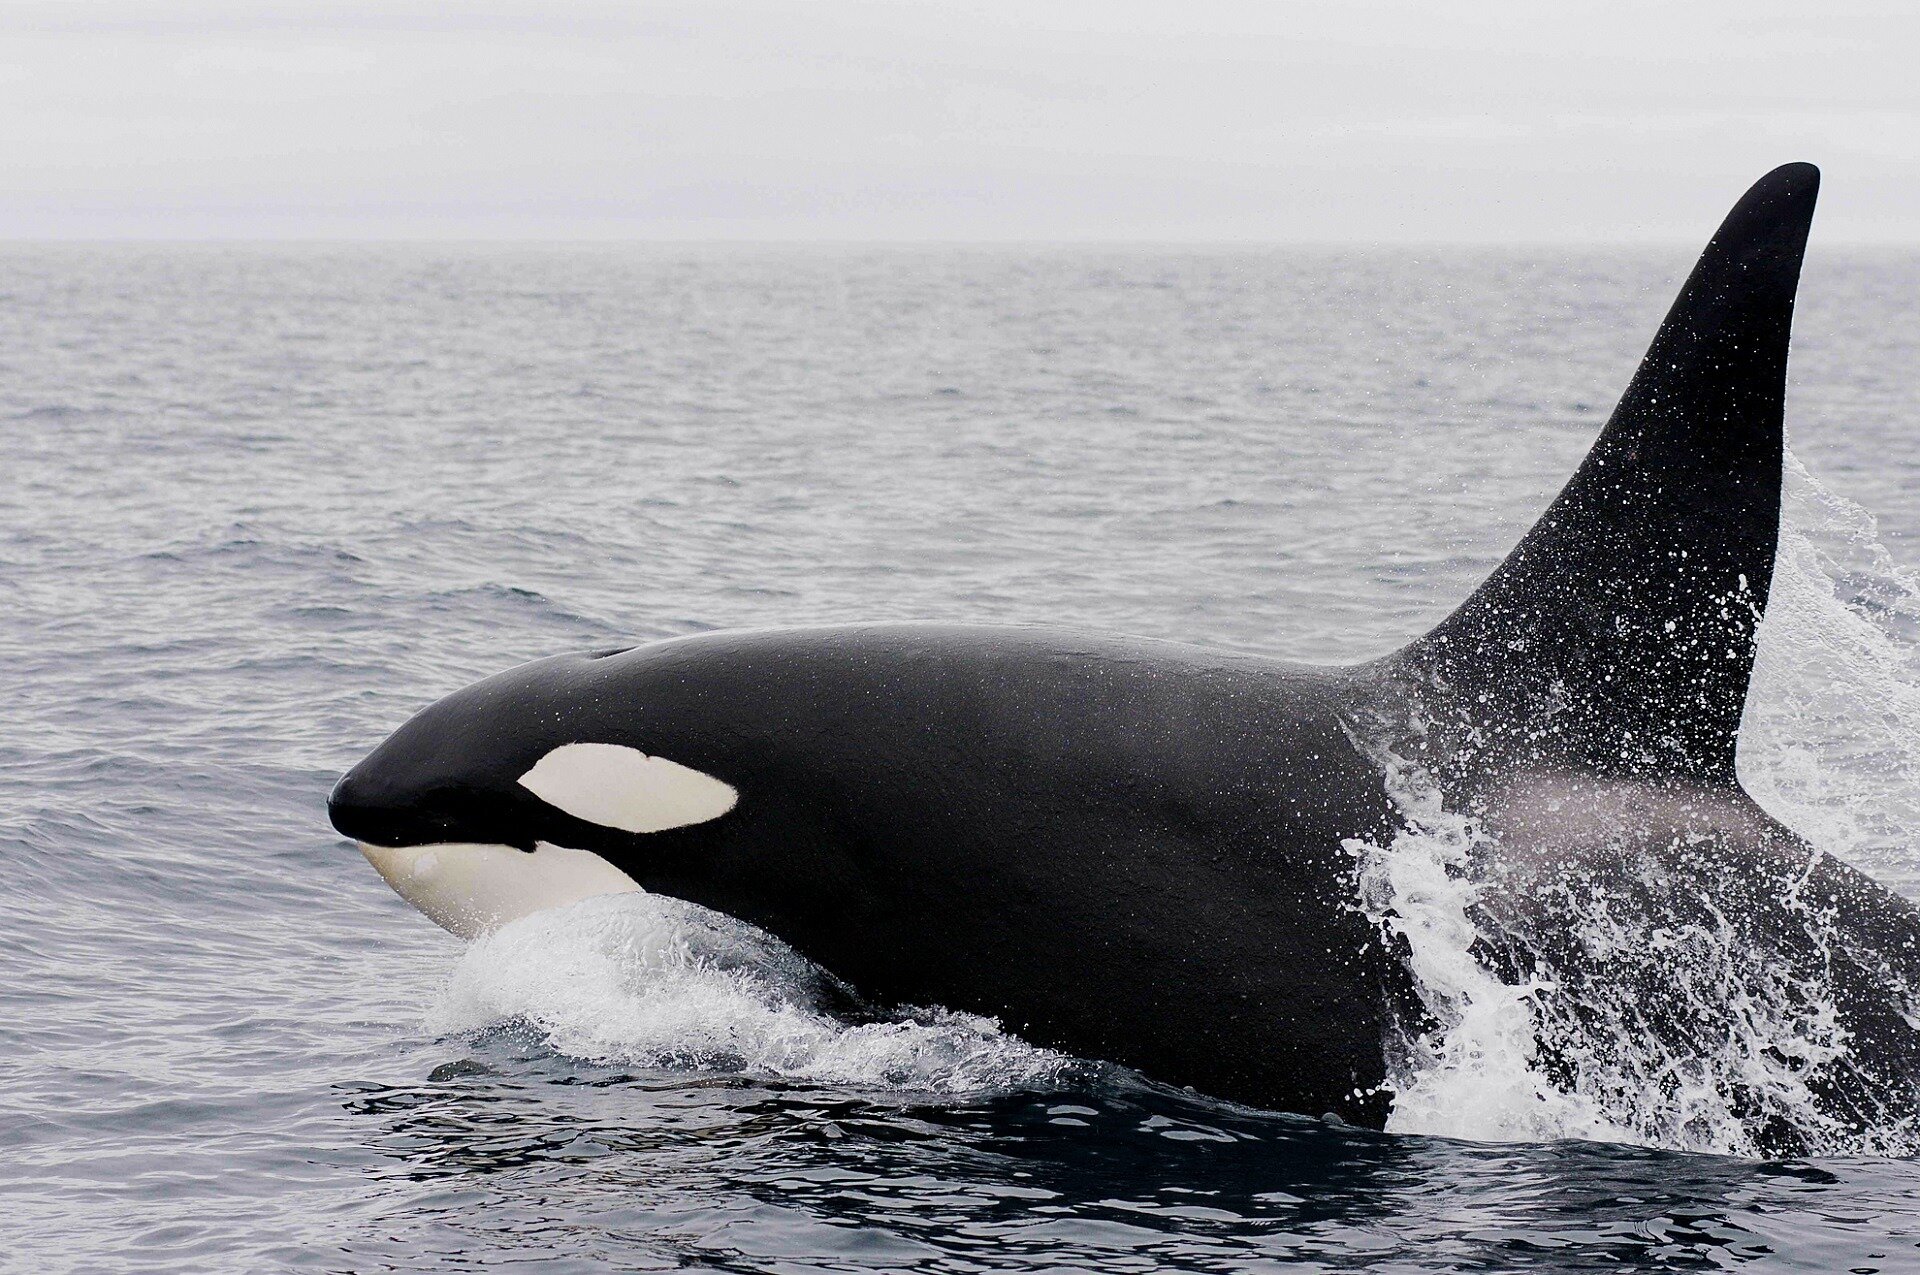 Why are killer whales going 'Moby-Dick' on yachts lately? Experts doubt ...